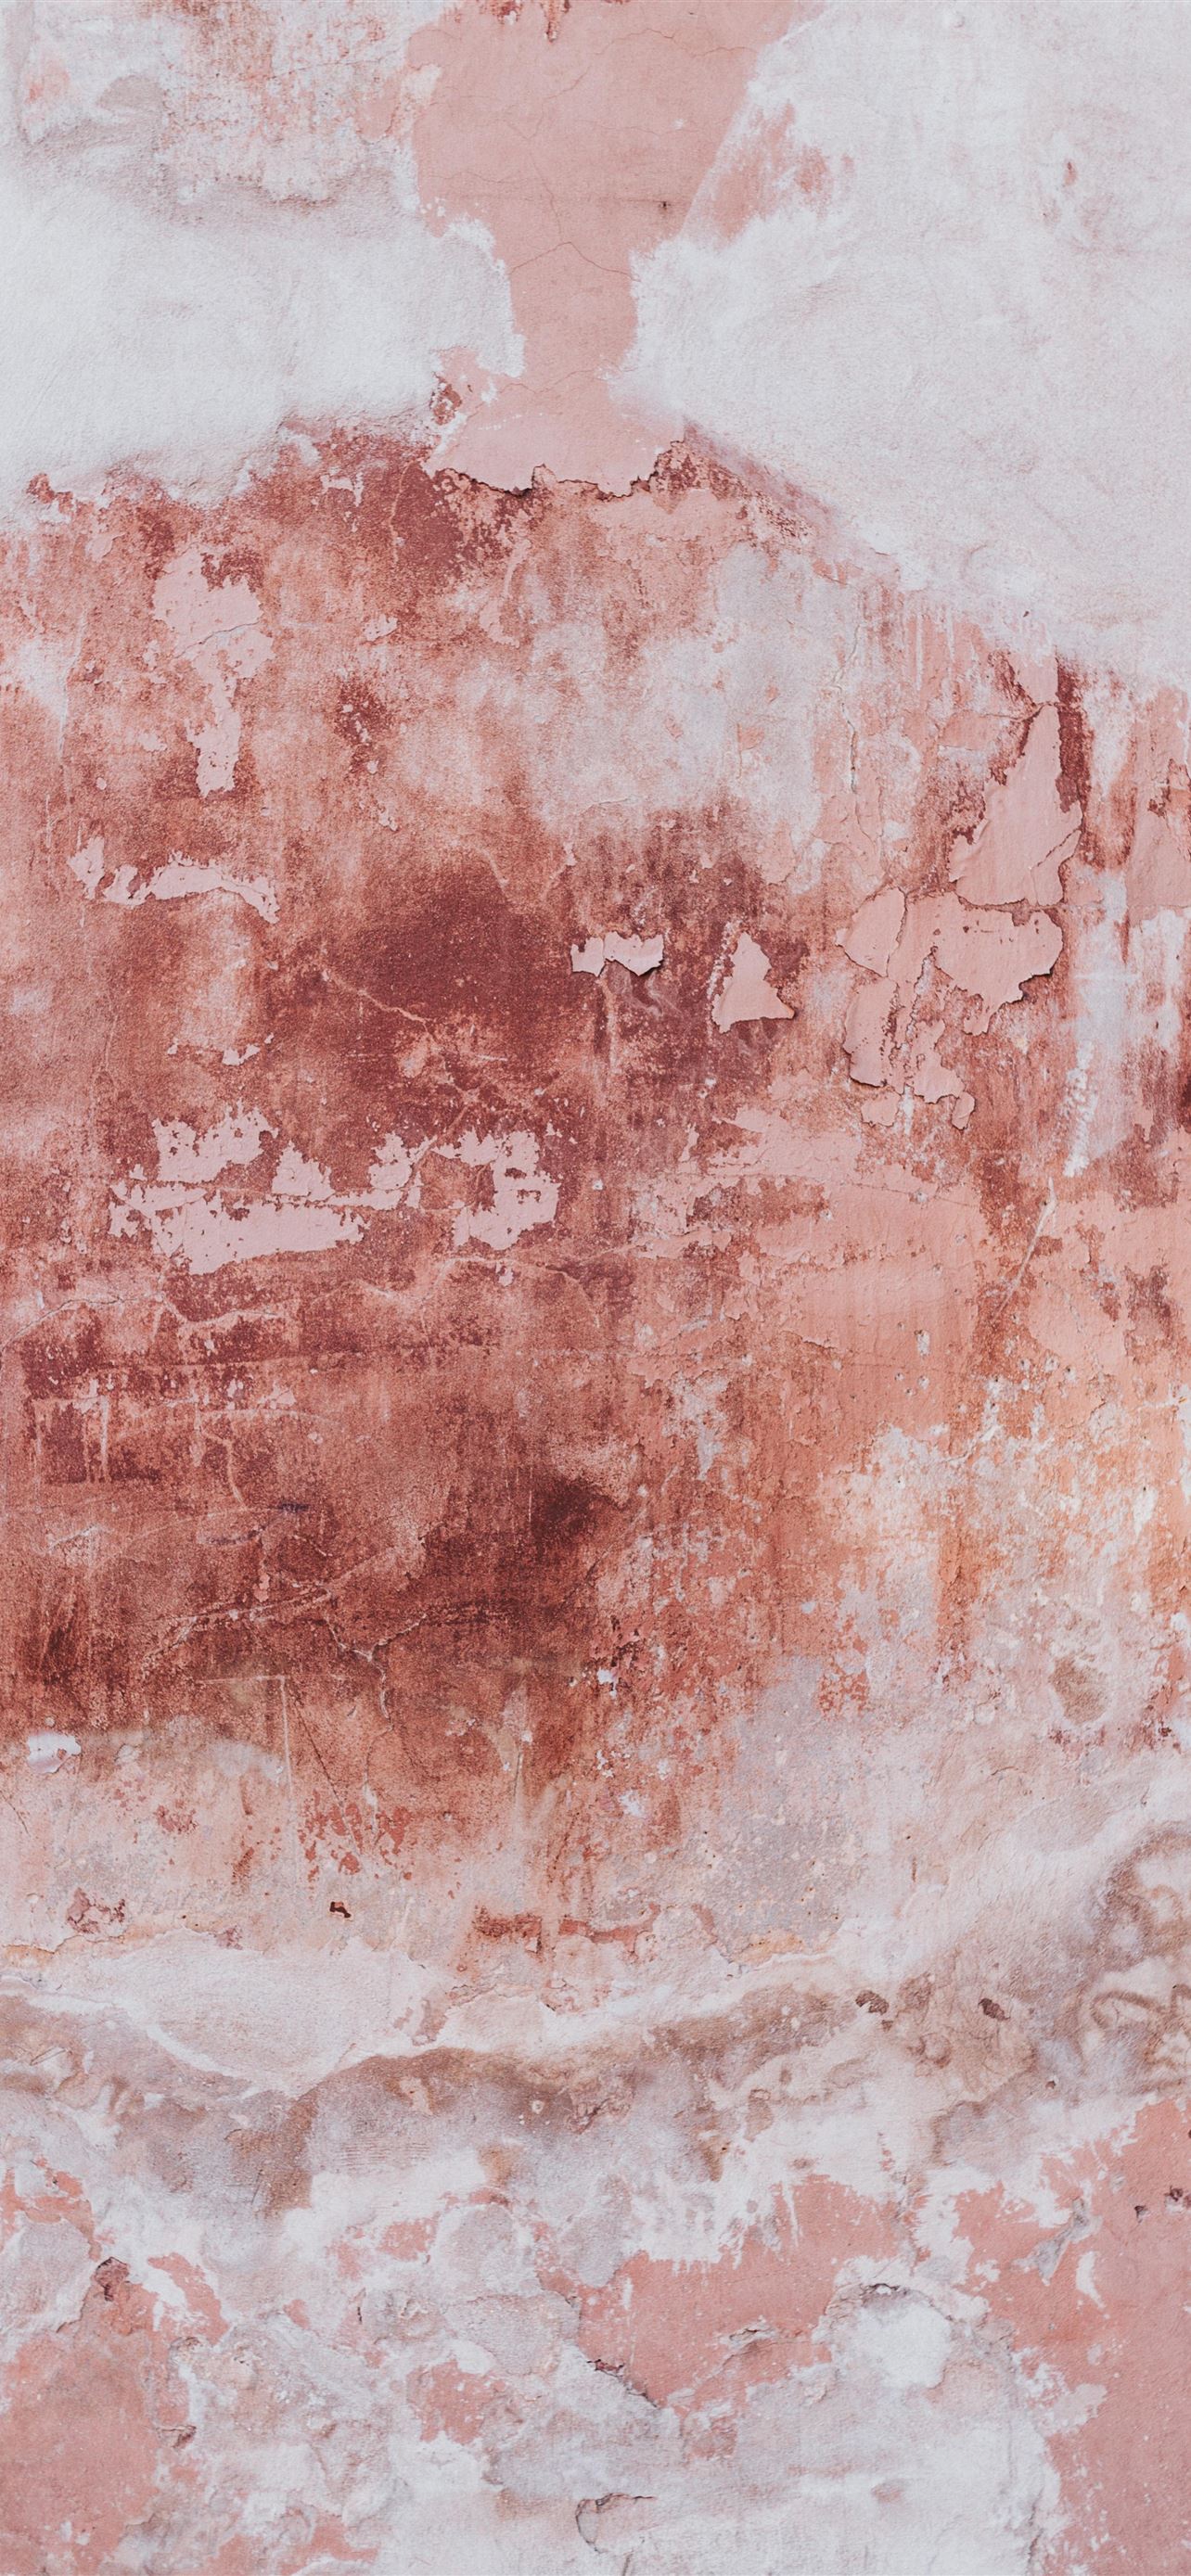 Pink Damaged Wall Iphone Wallpapers Free Download